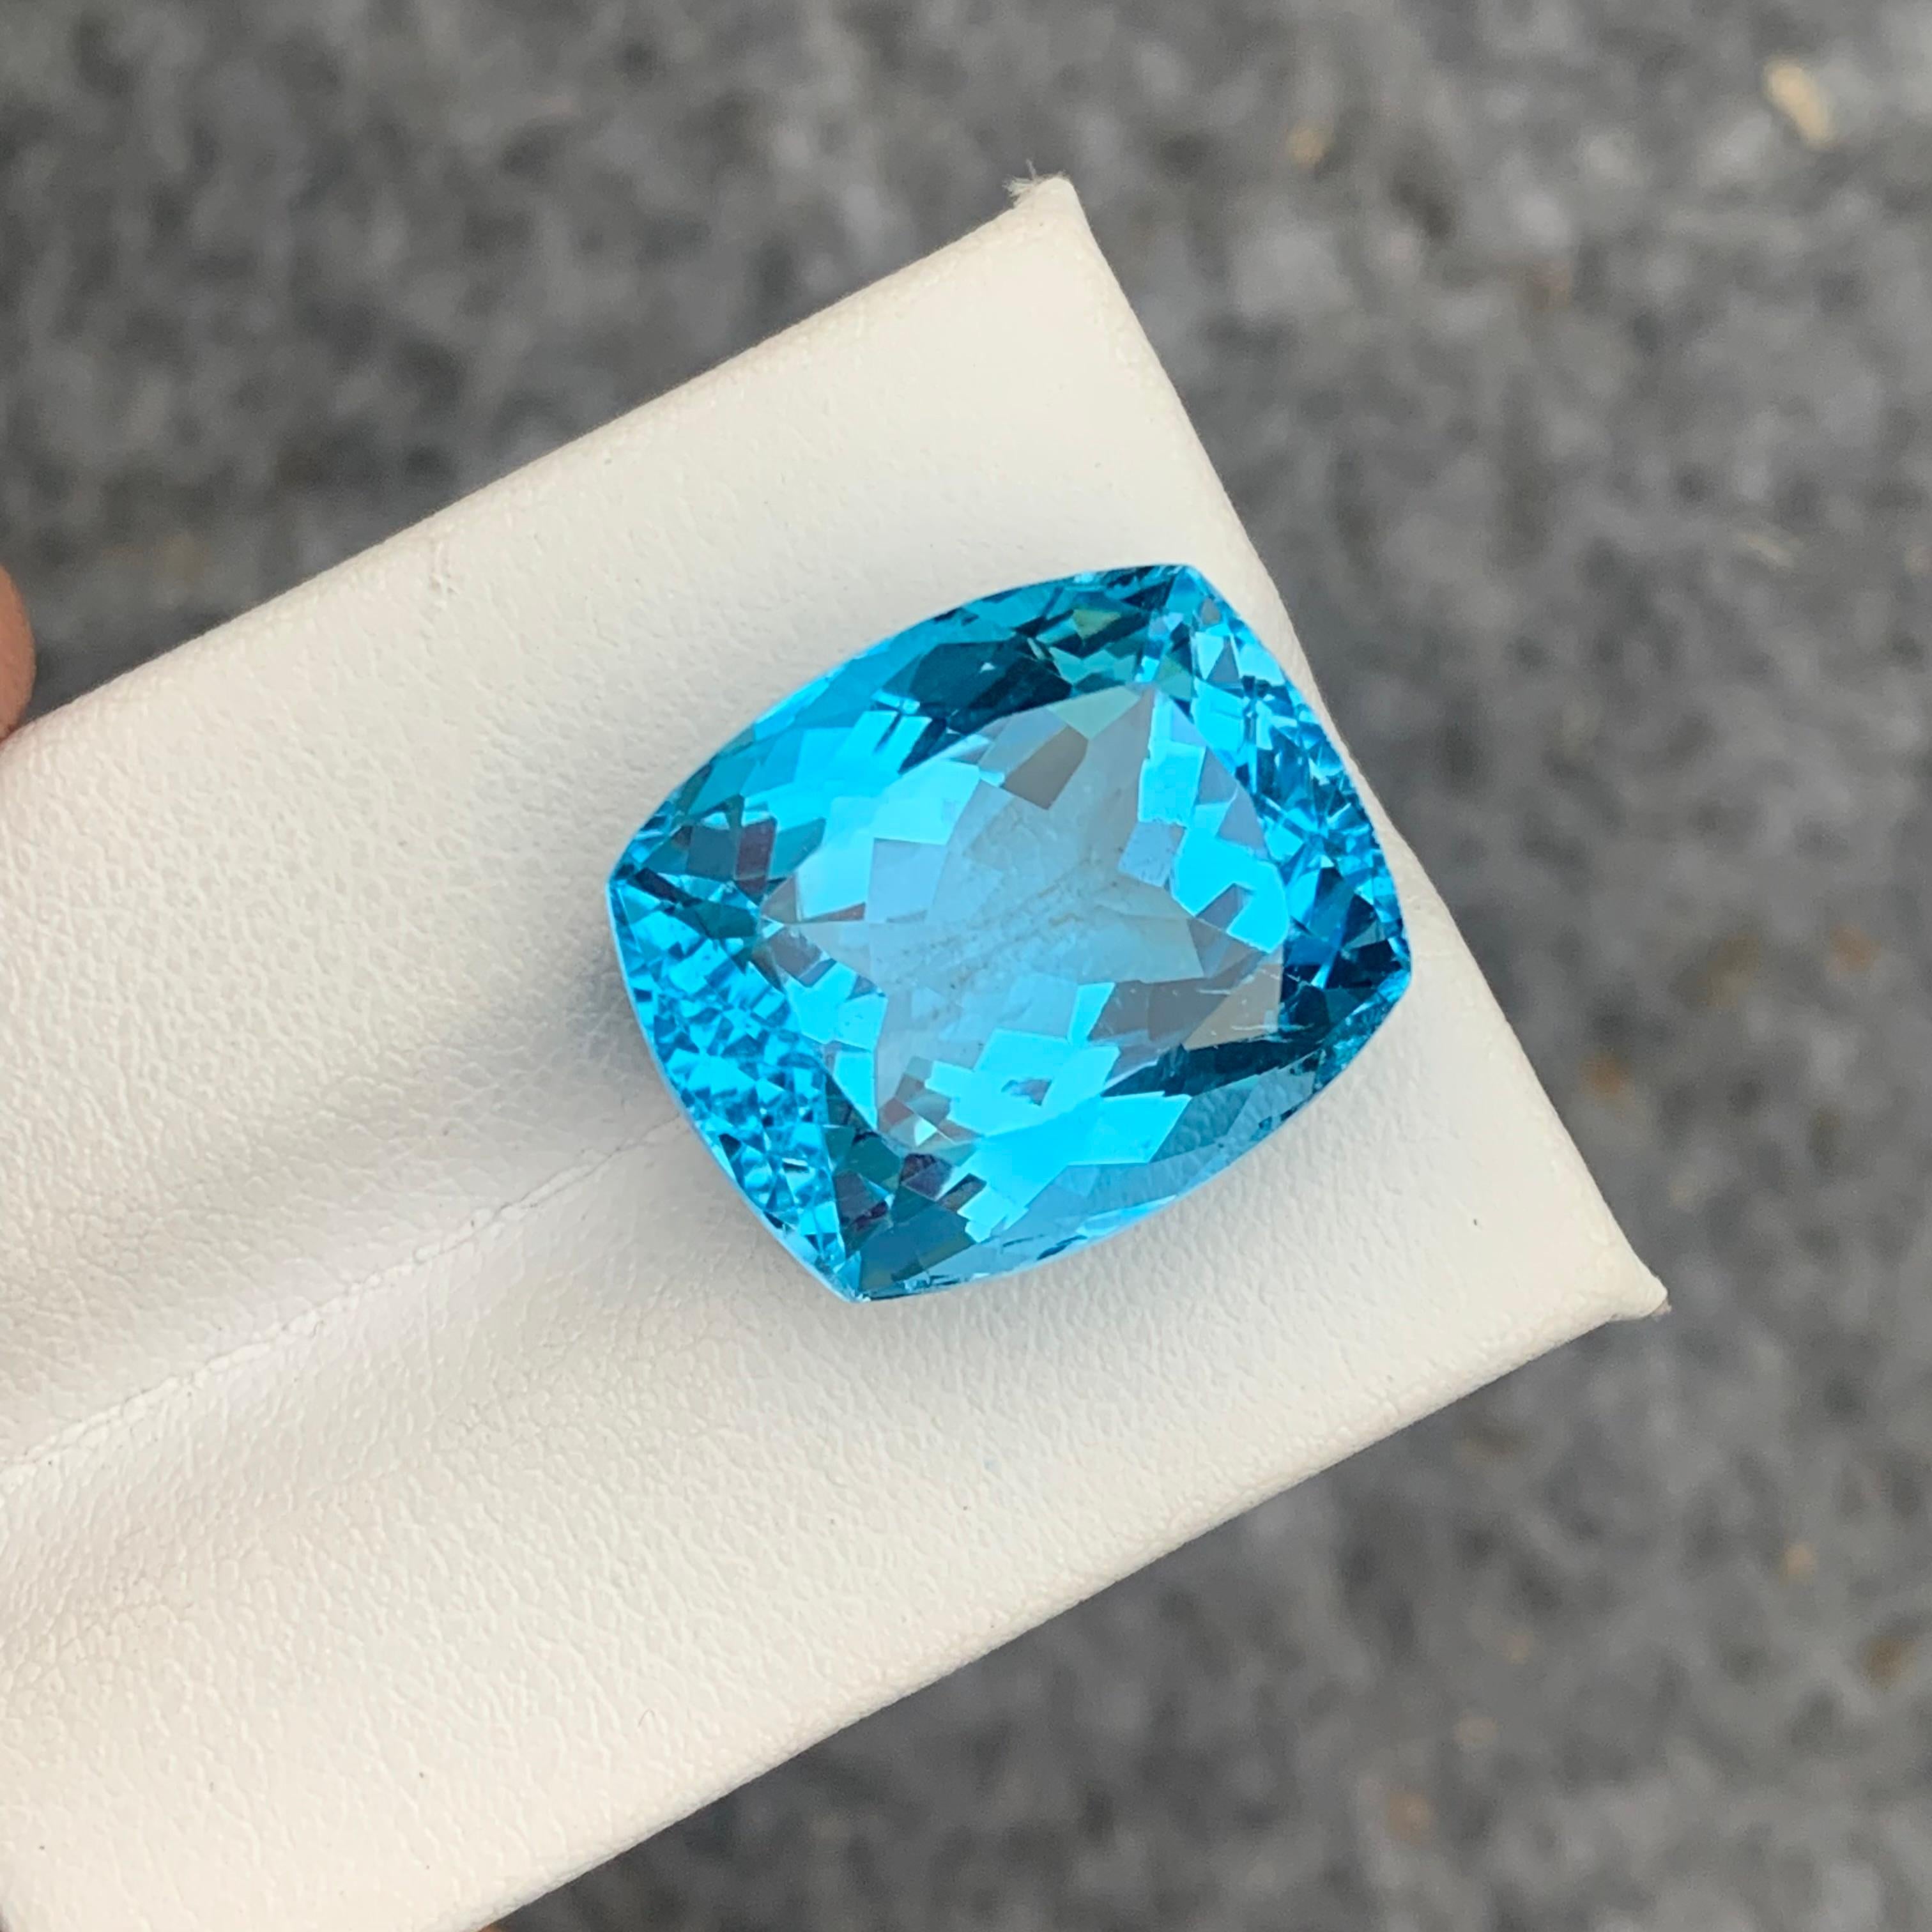 Arts and Crafts Gorgeous 31.10 Carat Loose Blue Topaz from Brazil Long Cushion Cut for Jewelry